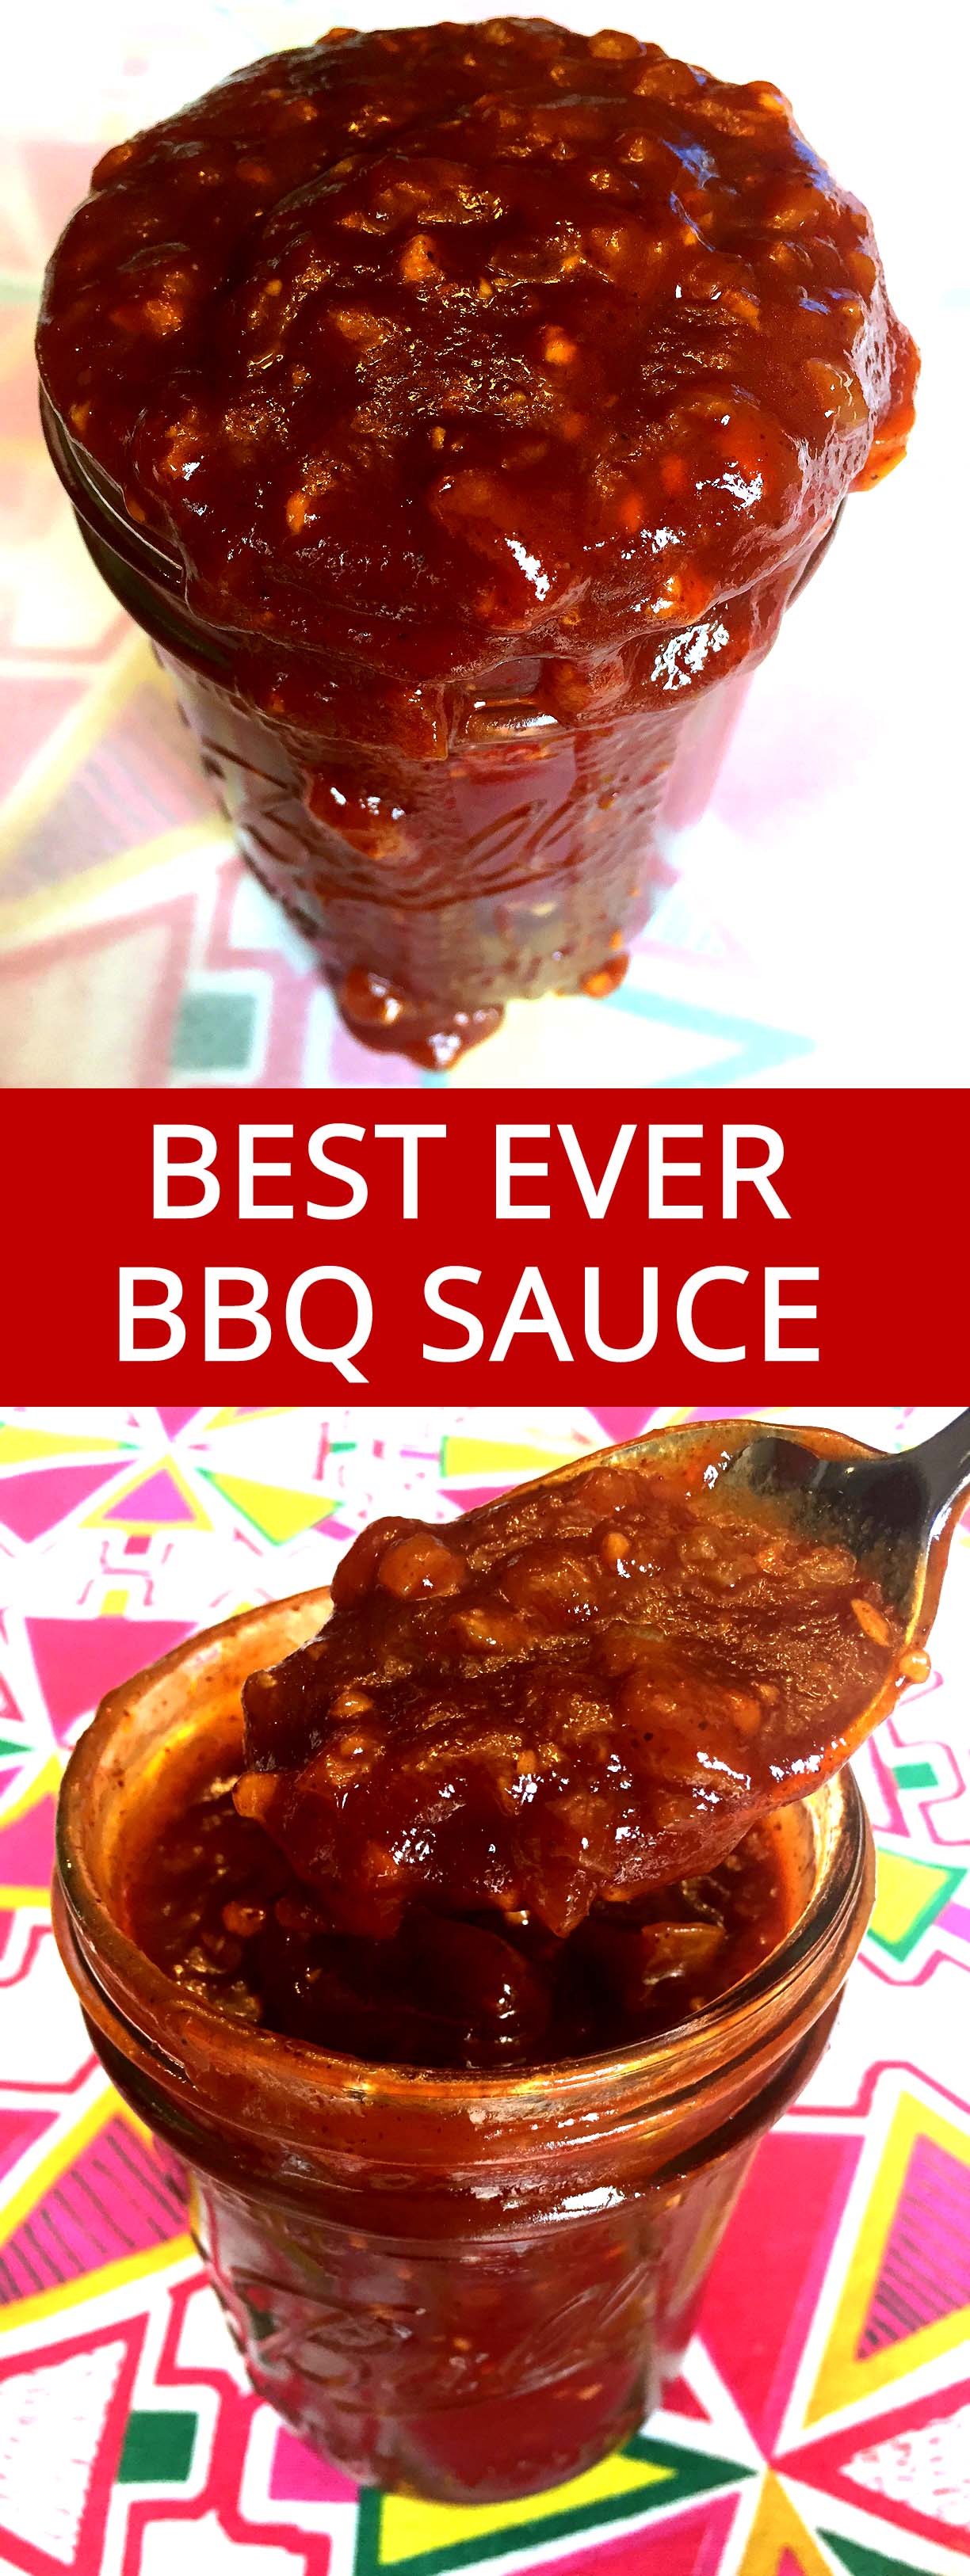 The Best Ideas For Best Bbq Sauce Recipe Best Recipes Ideas And 